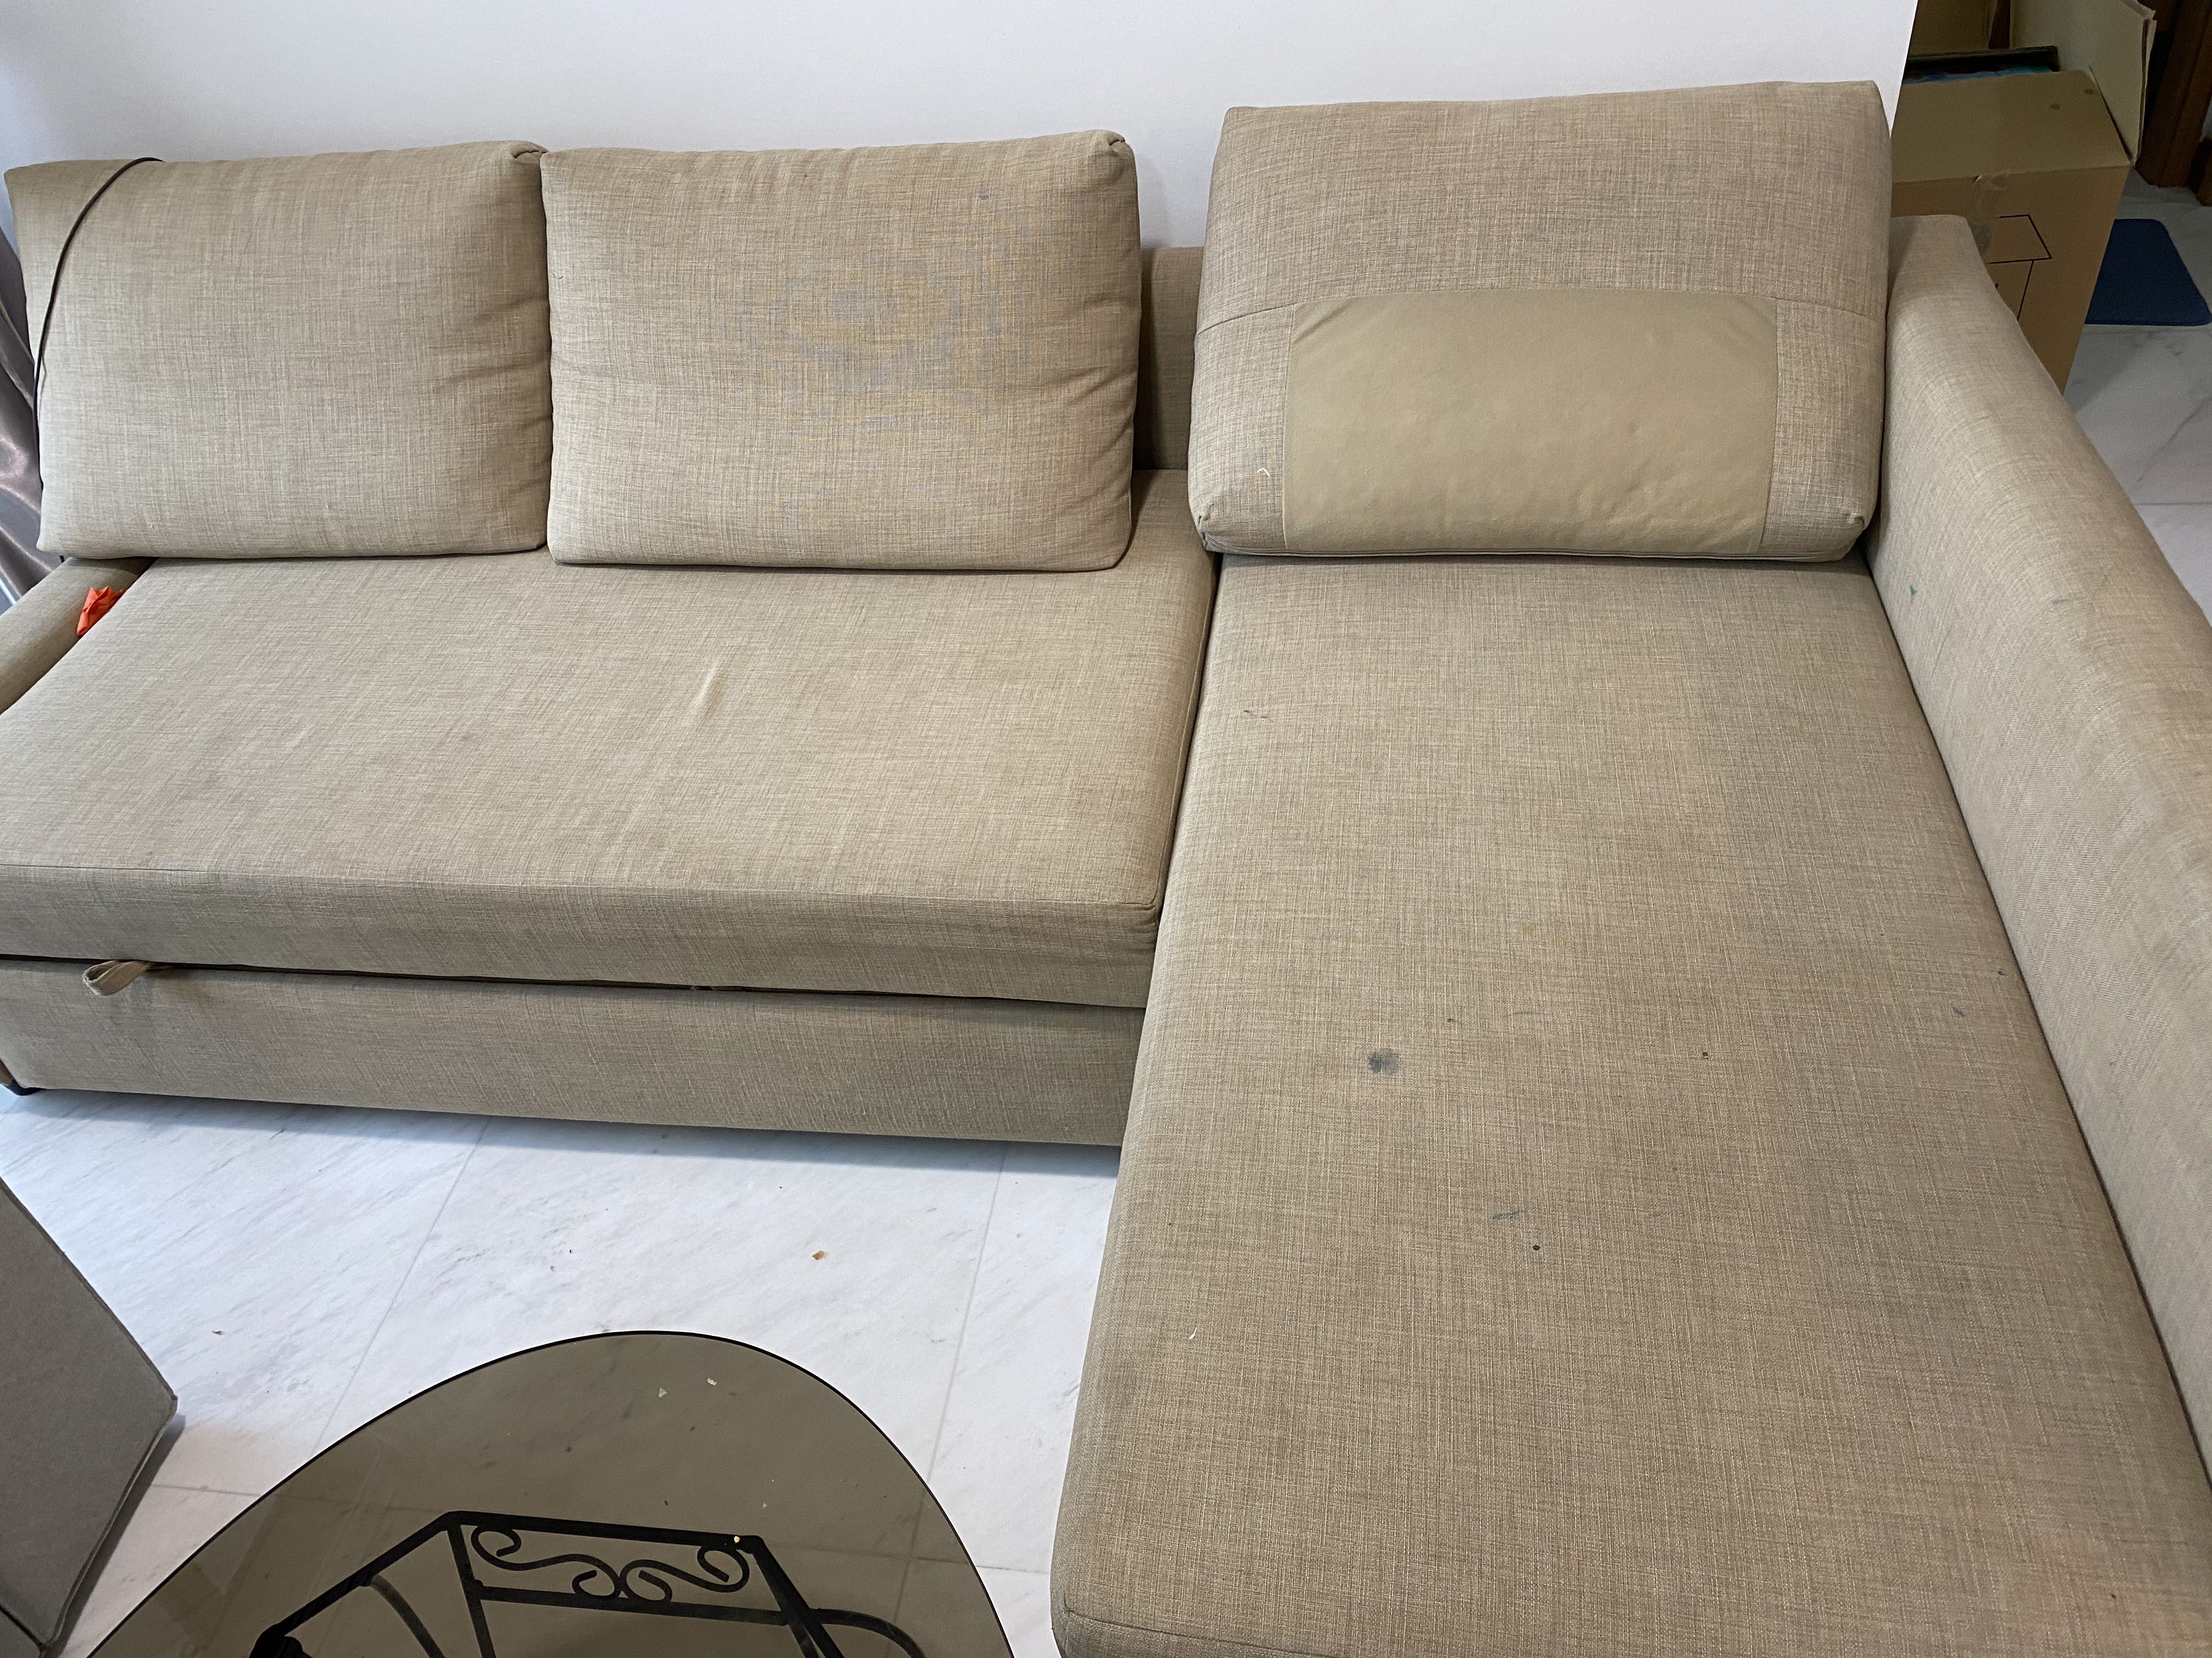 ikea sofa come bed with storage